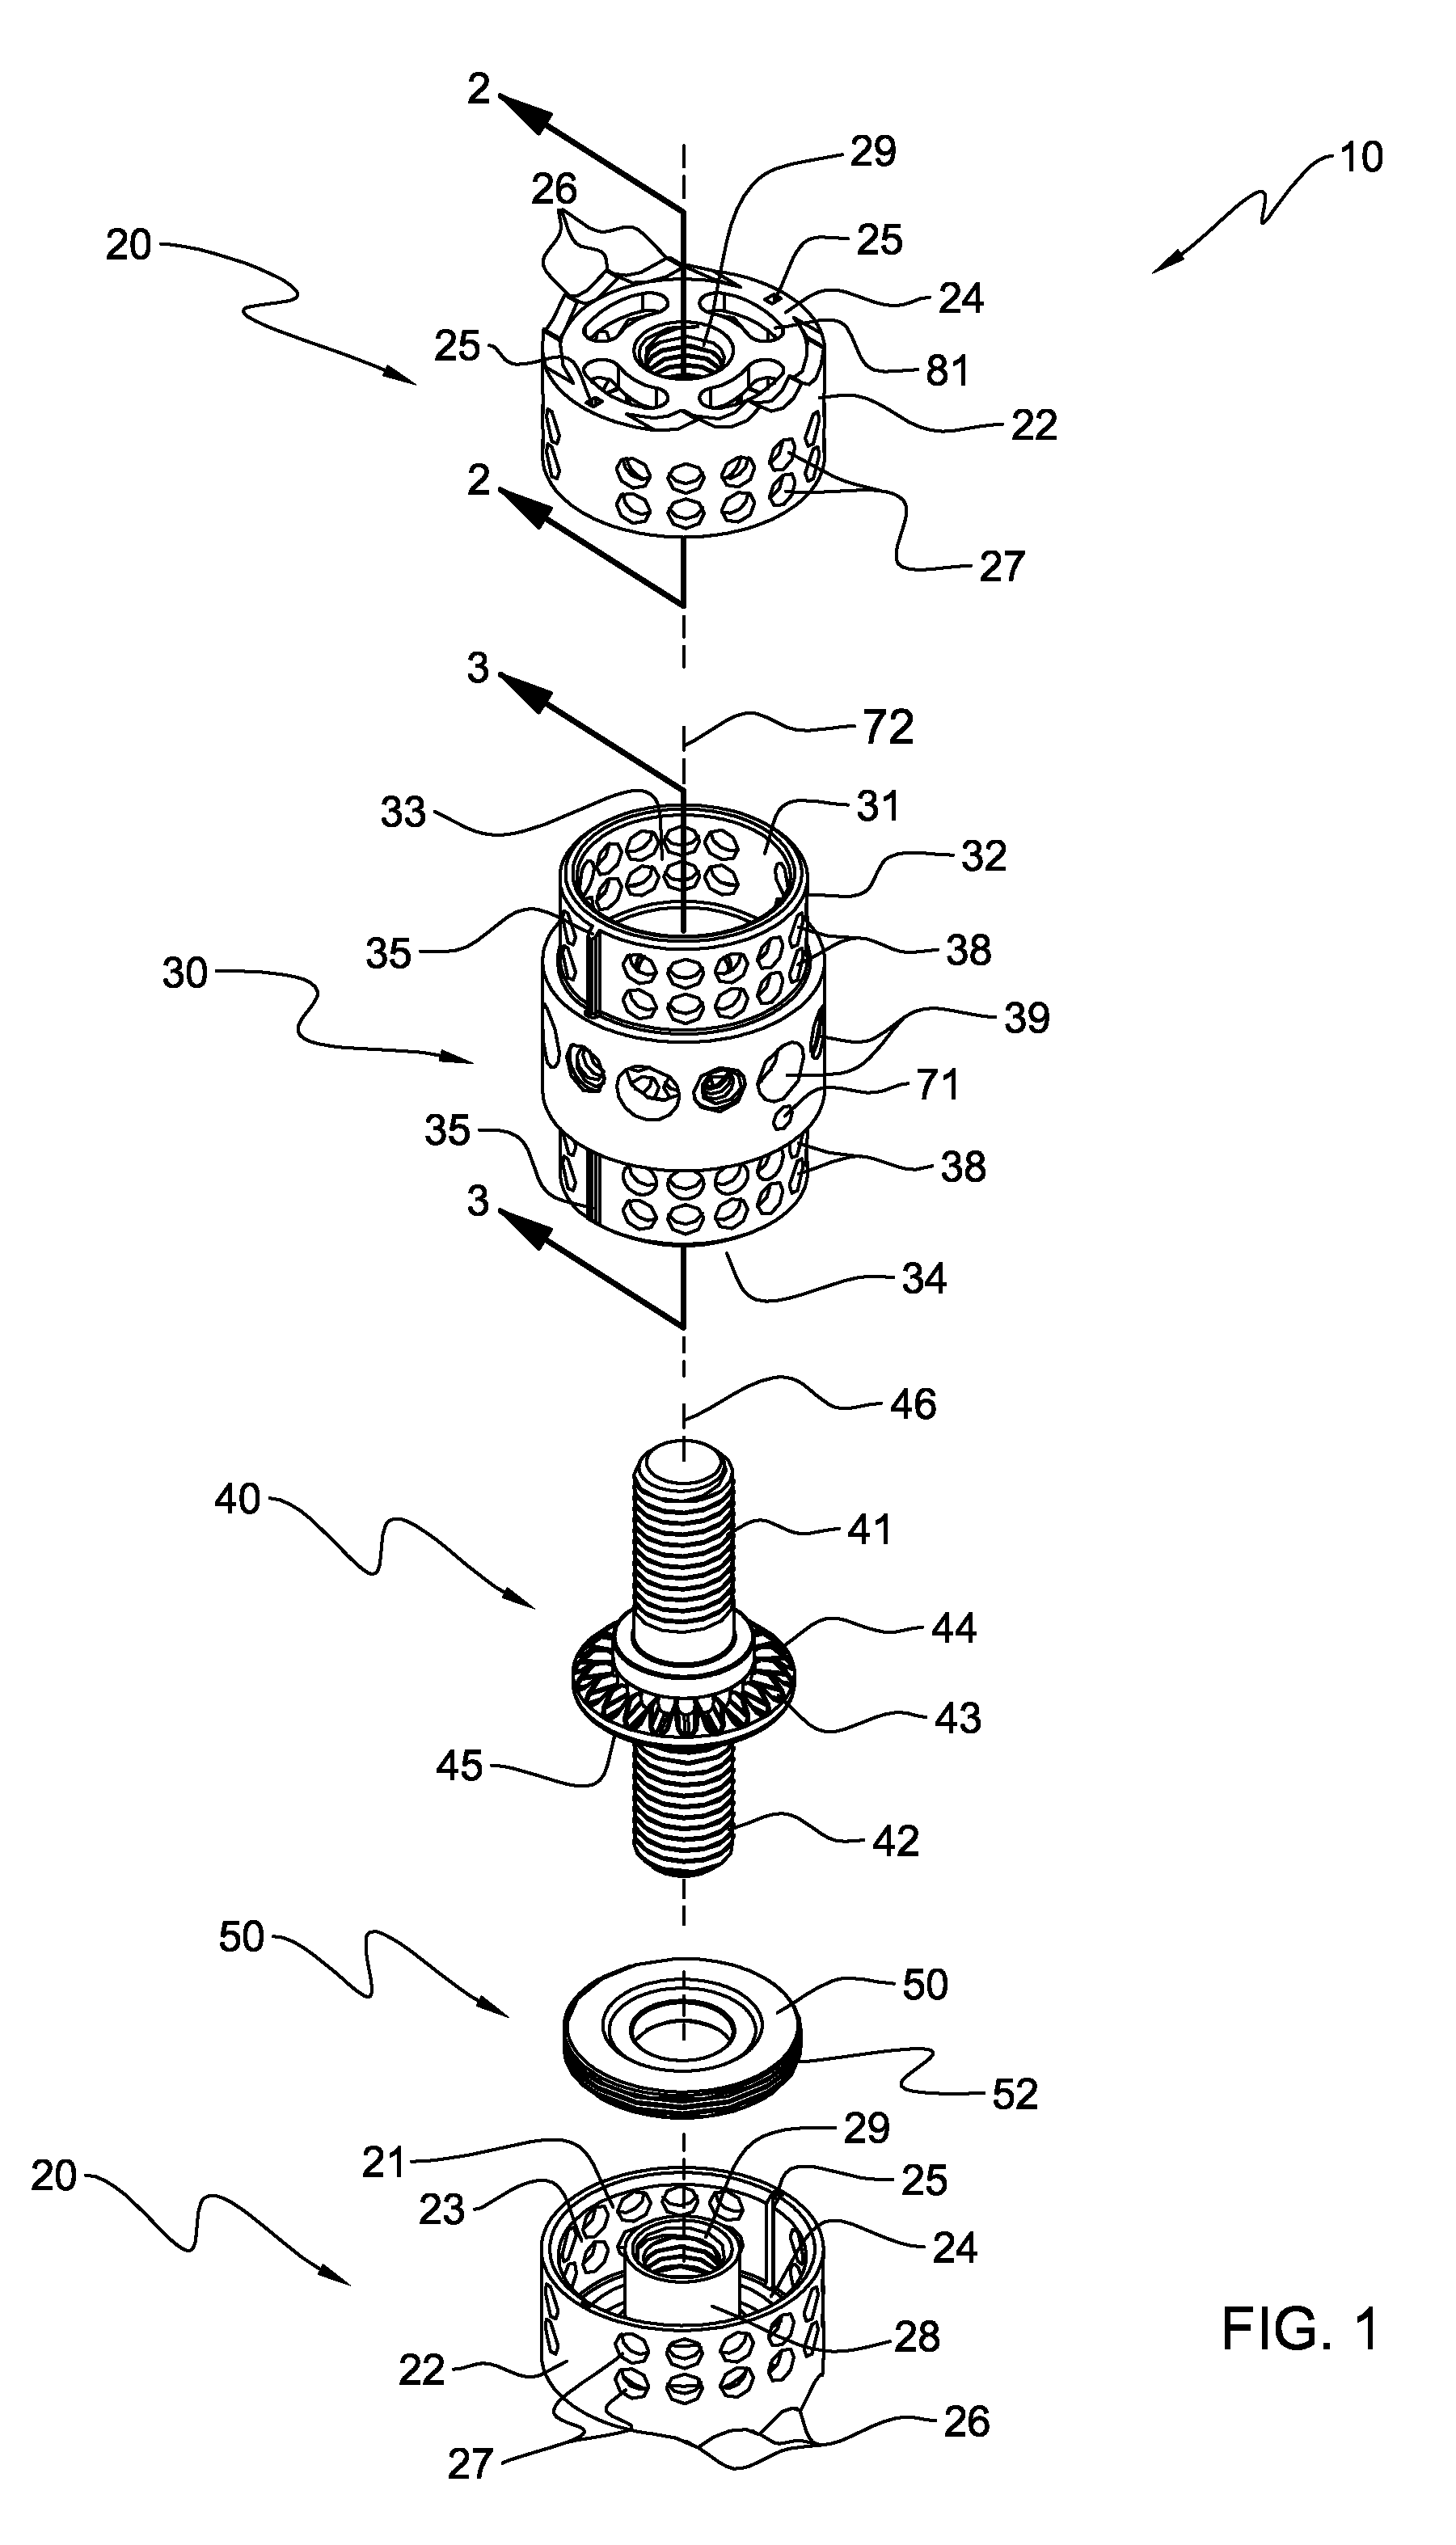 Footplate member and a method for use in a vertebral body replacement device